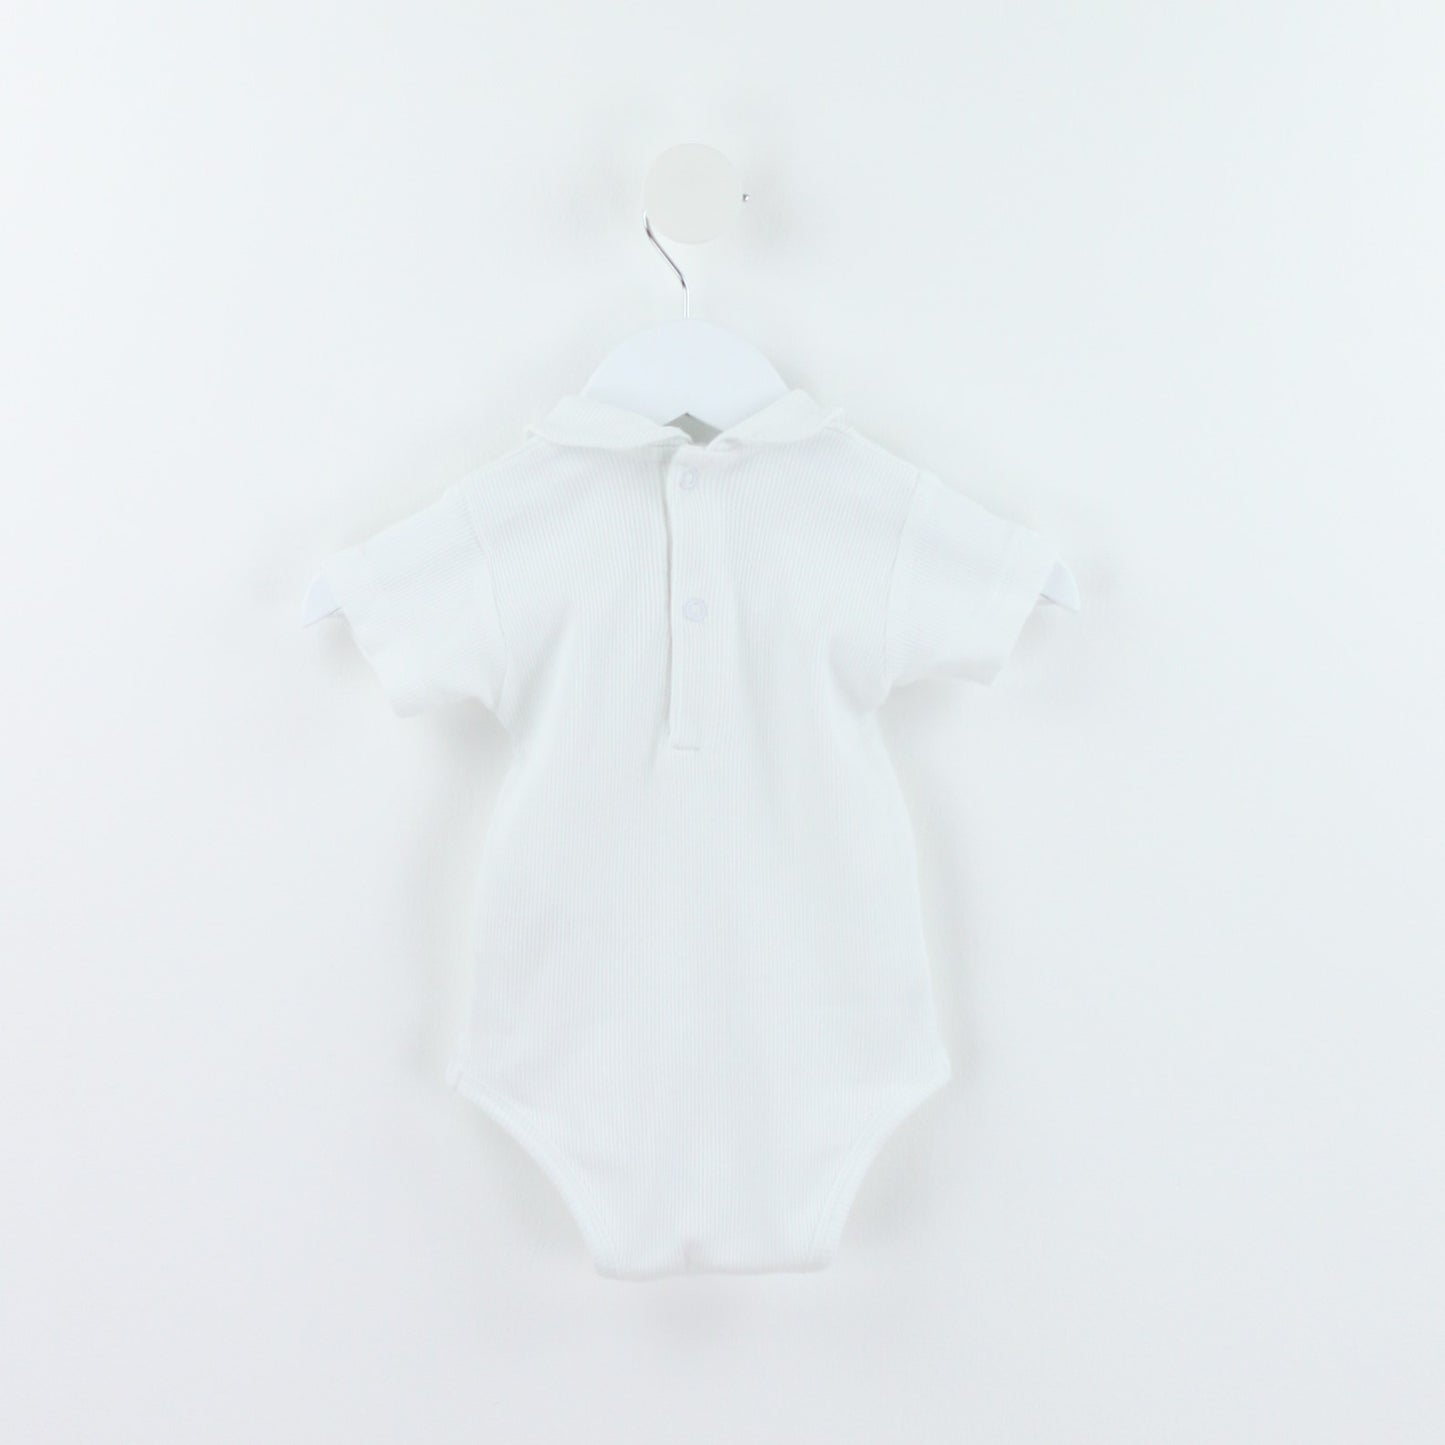 NECK & NECK Pre-loved Bodysuit with Collar (3-6M)